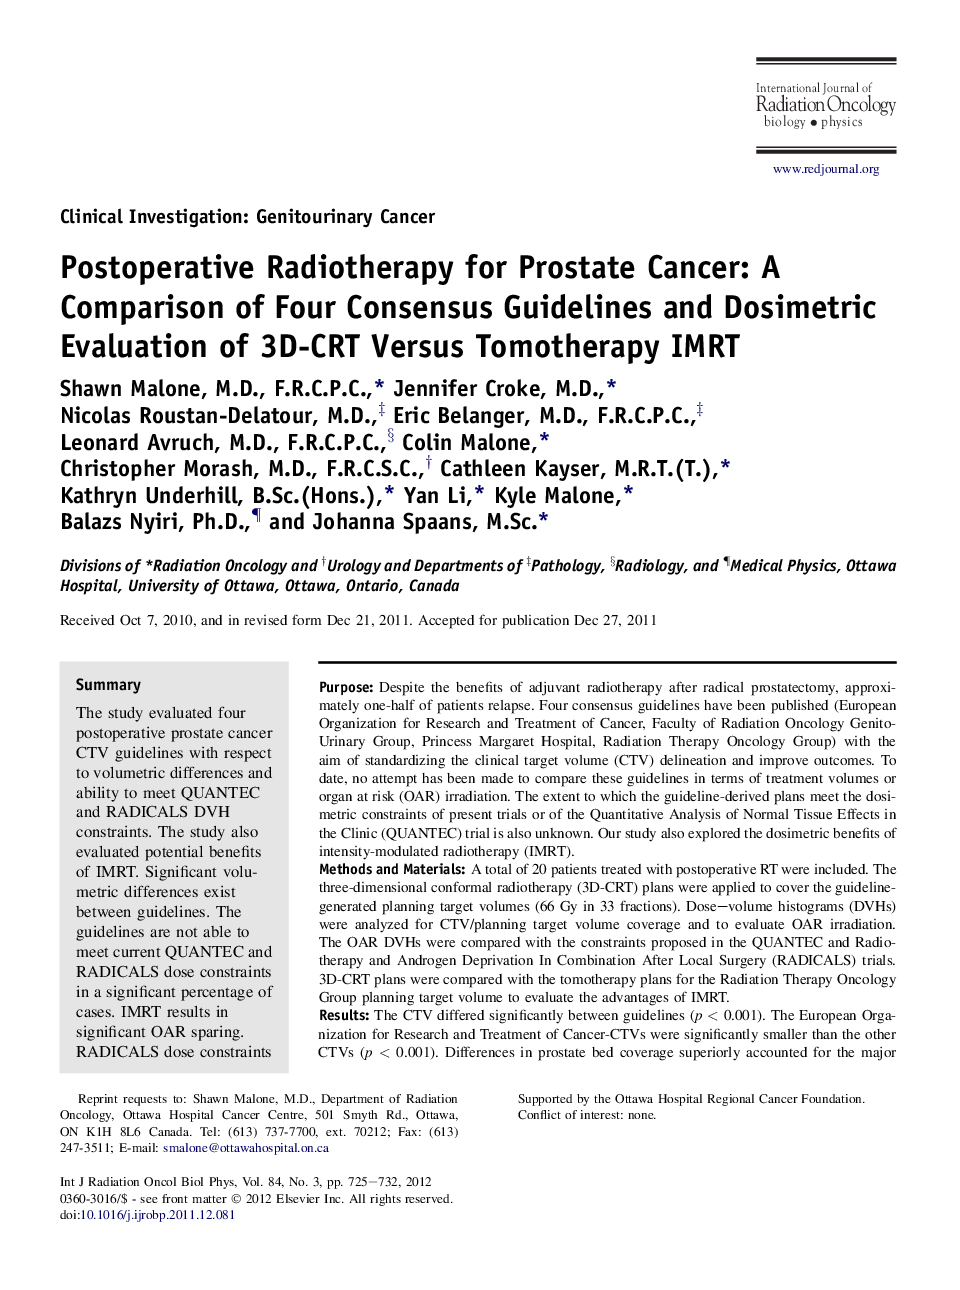 Postoperative Radiotherapy for Prostate Cancer: A Comparison of Four Consensus Guidelines and Dosimetric Evaluation of 3D-CRT Versus Tomotherapy IMRT